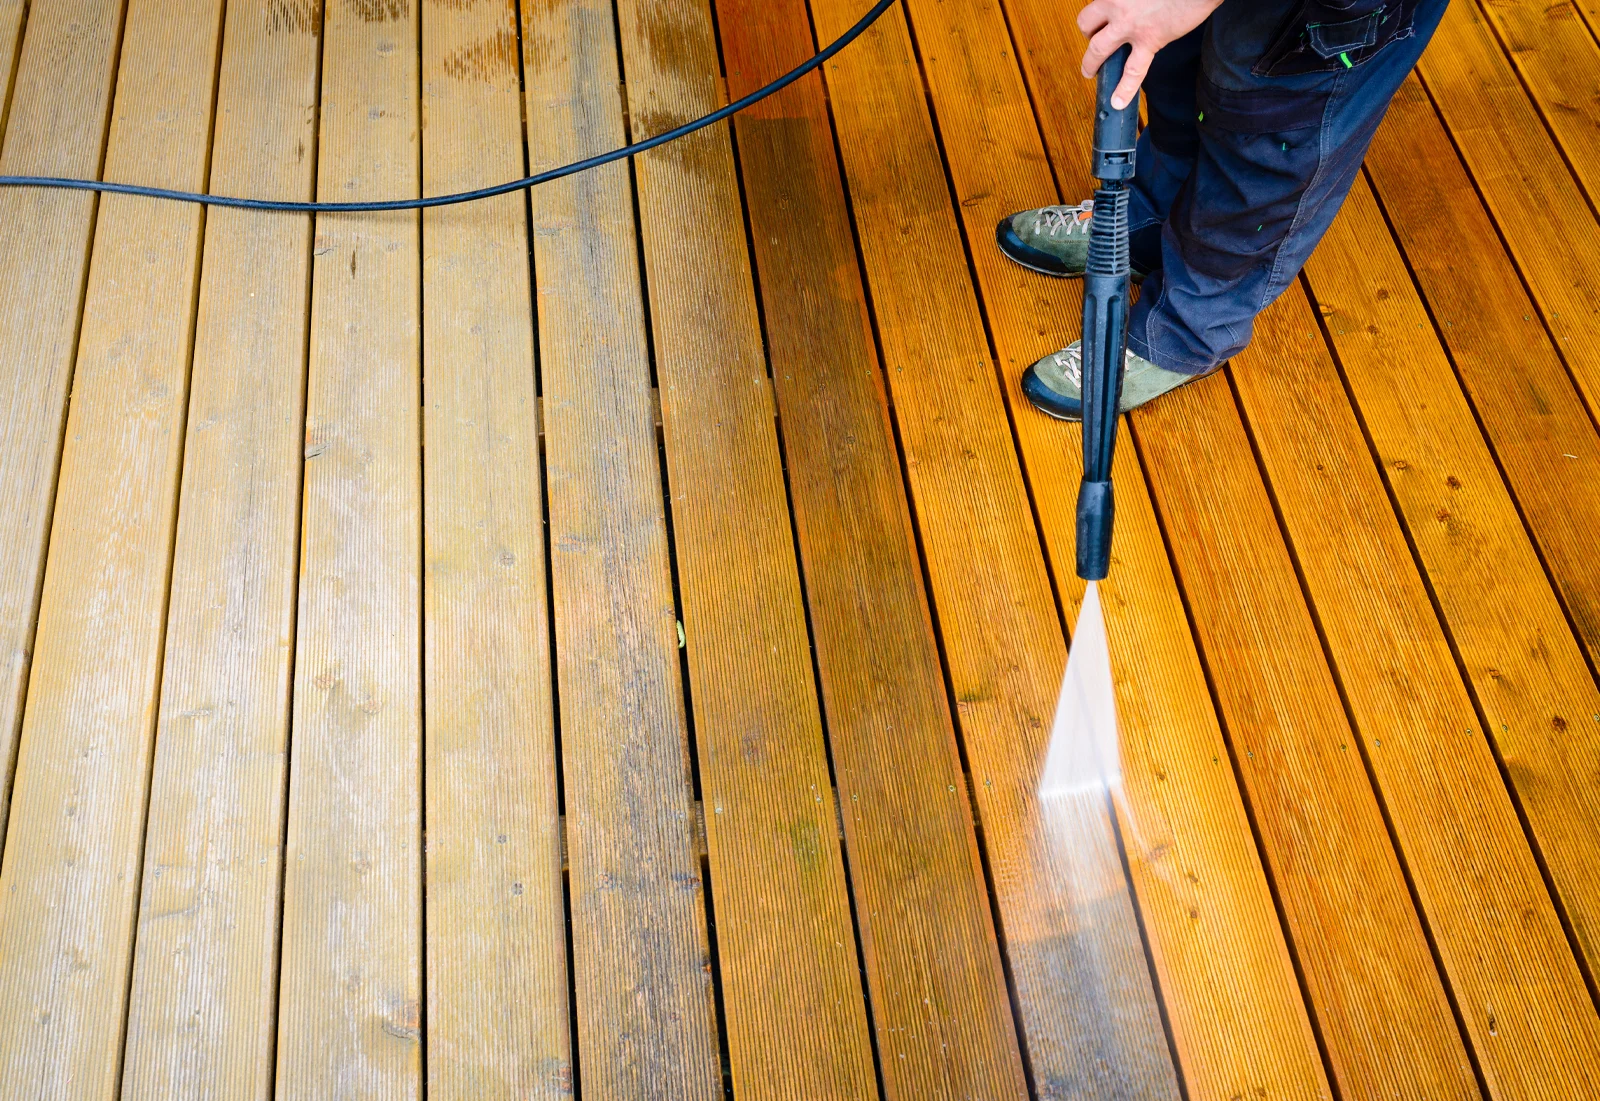 A person power washing a deck